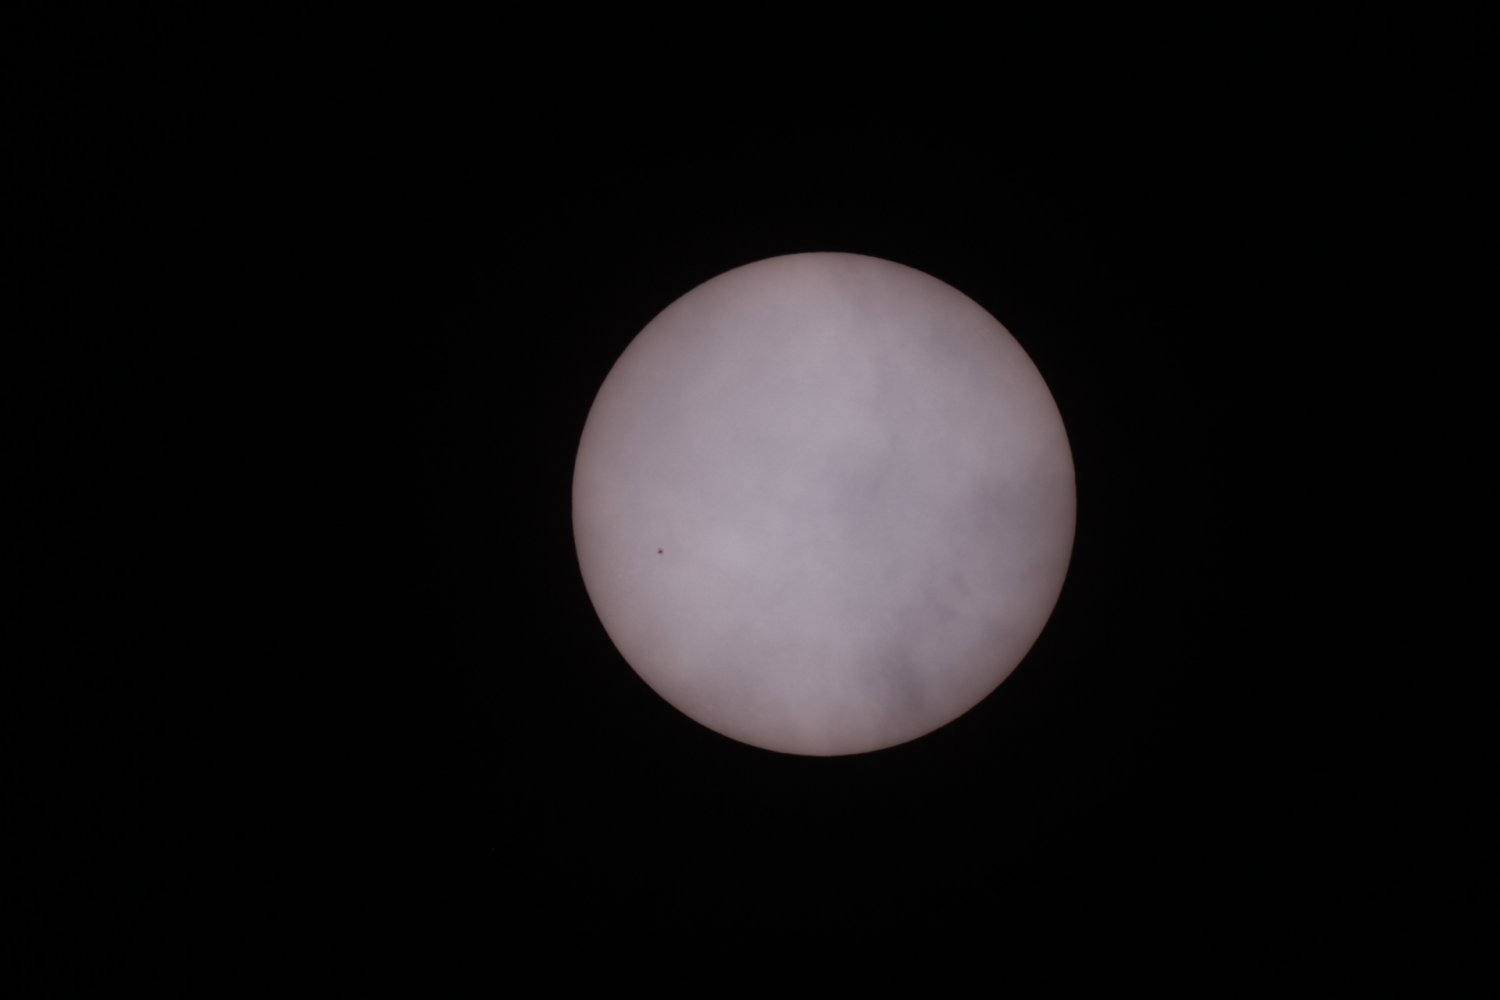 The Sun photographed from Talmassons: 37 KB; click on the image to enlarge